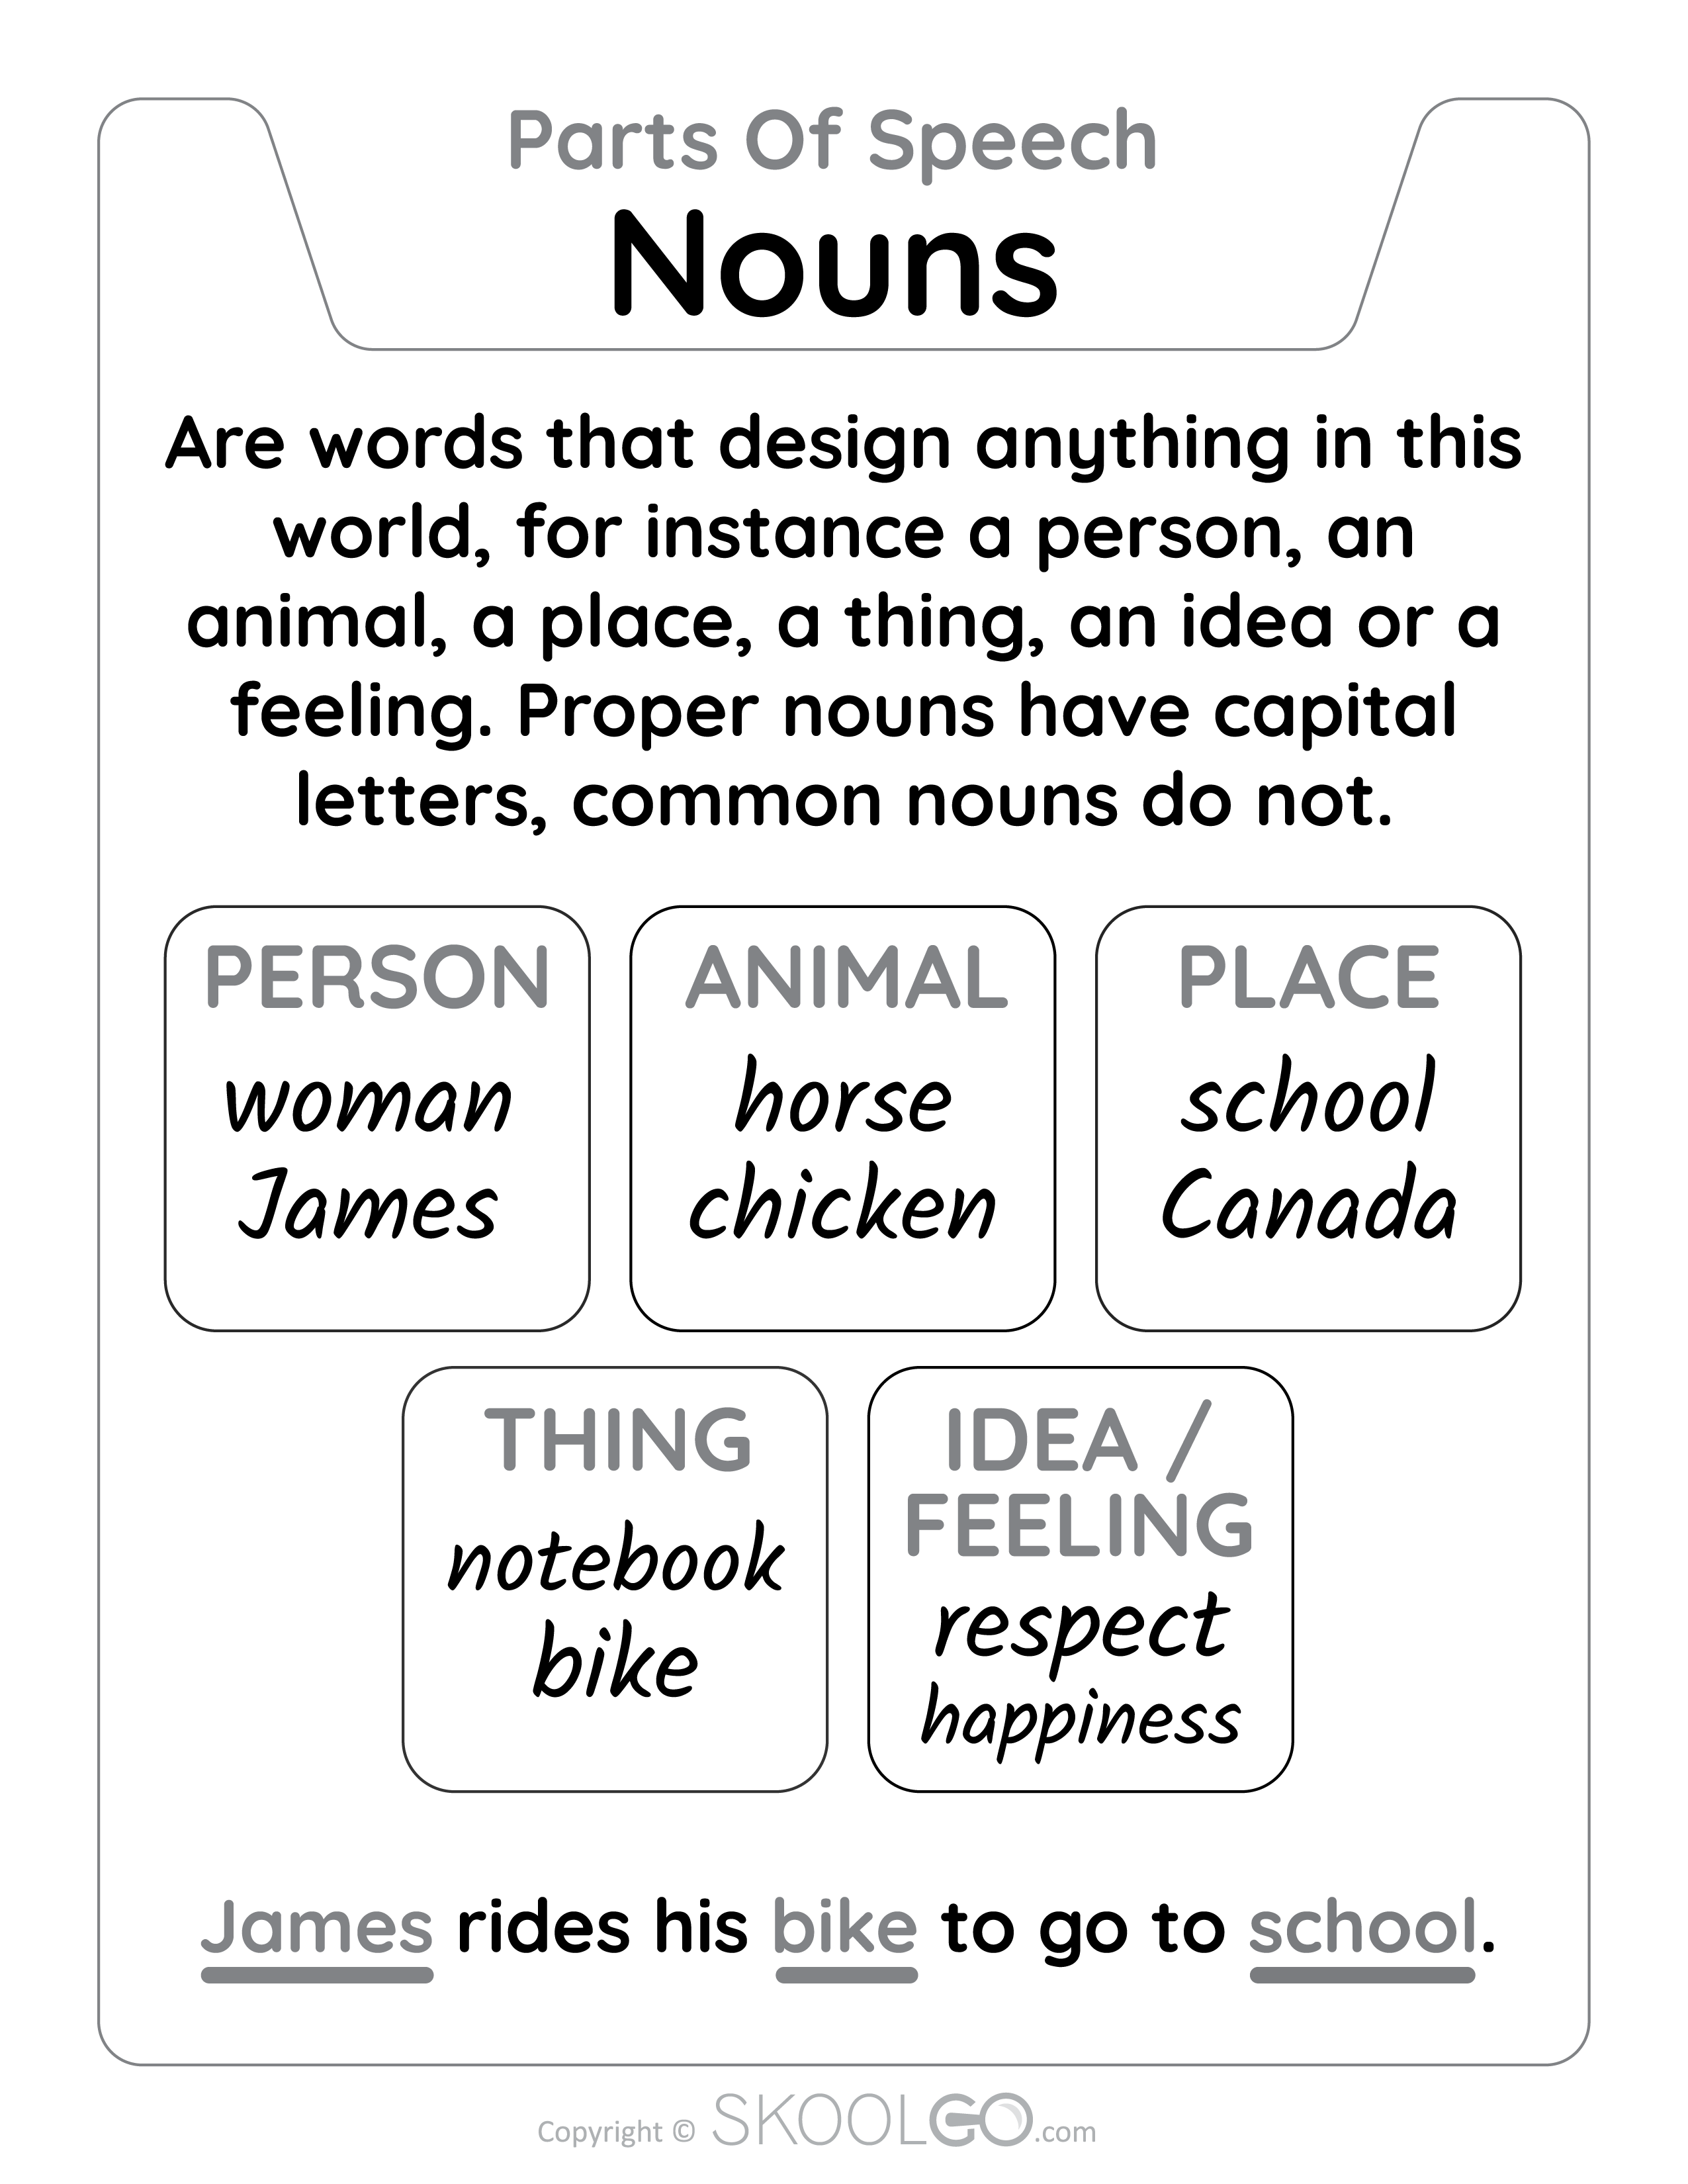 Nouns - Parts Of Speech - Free Learning Classroom Poster